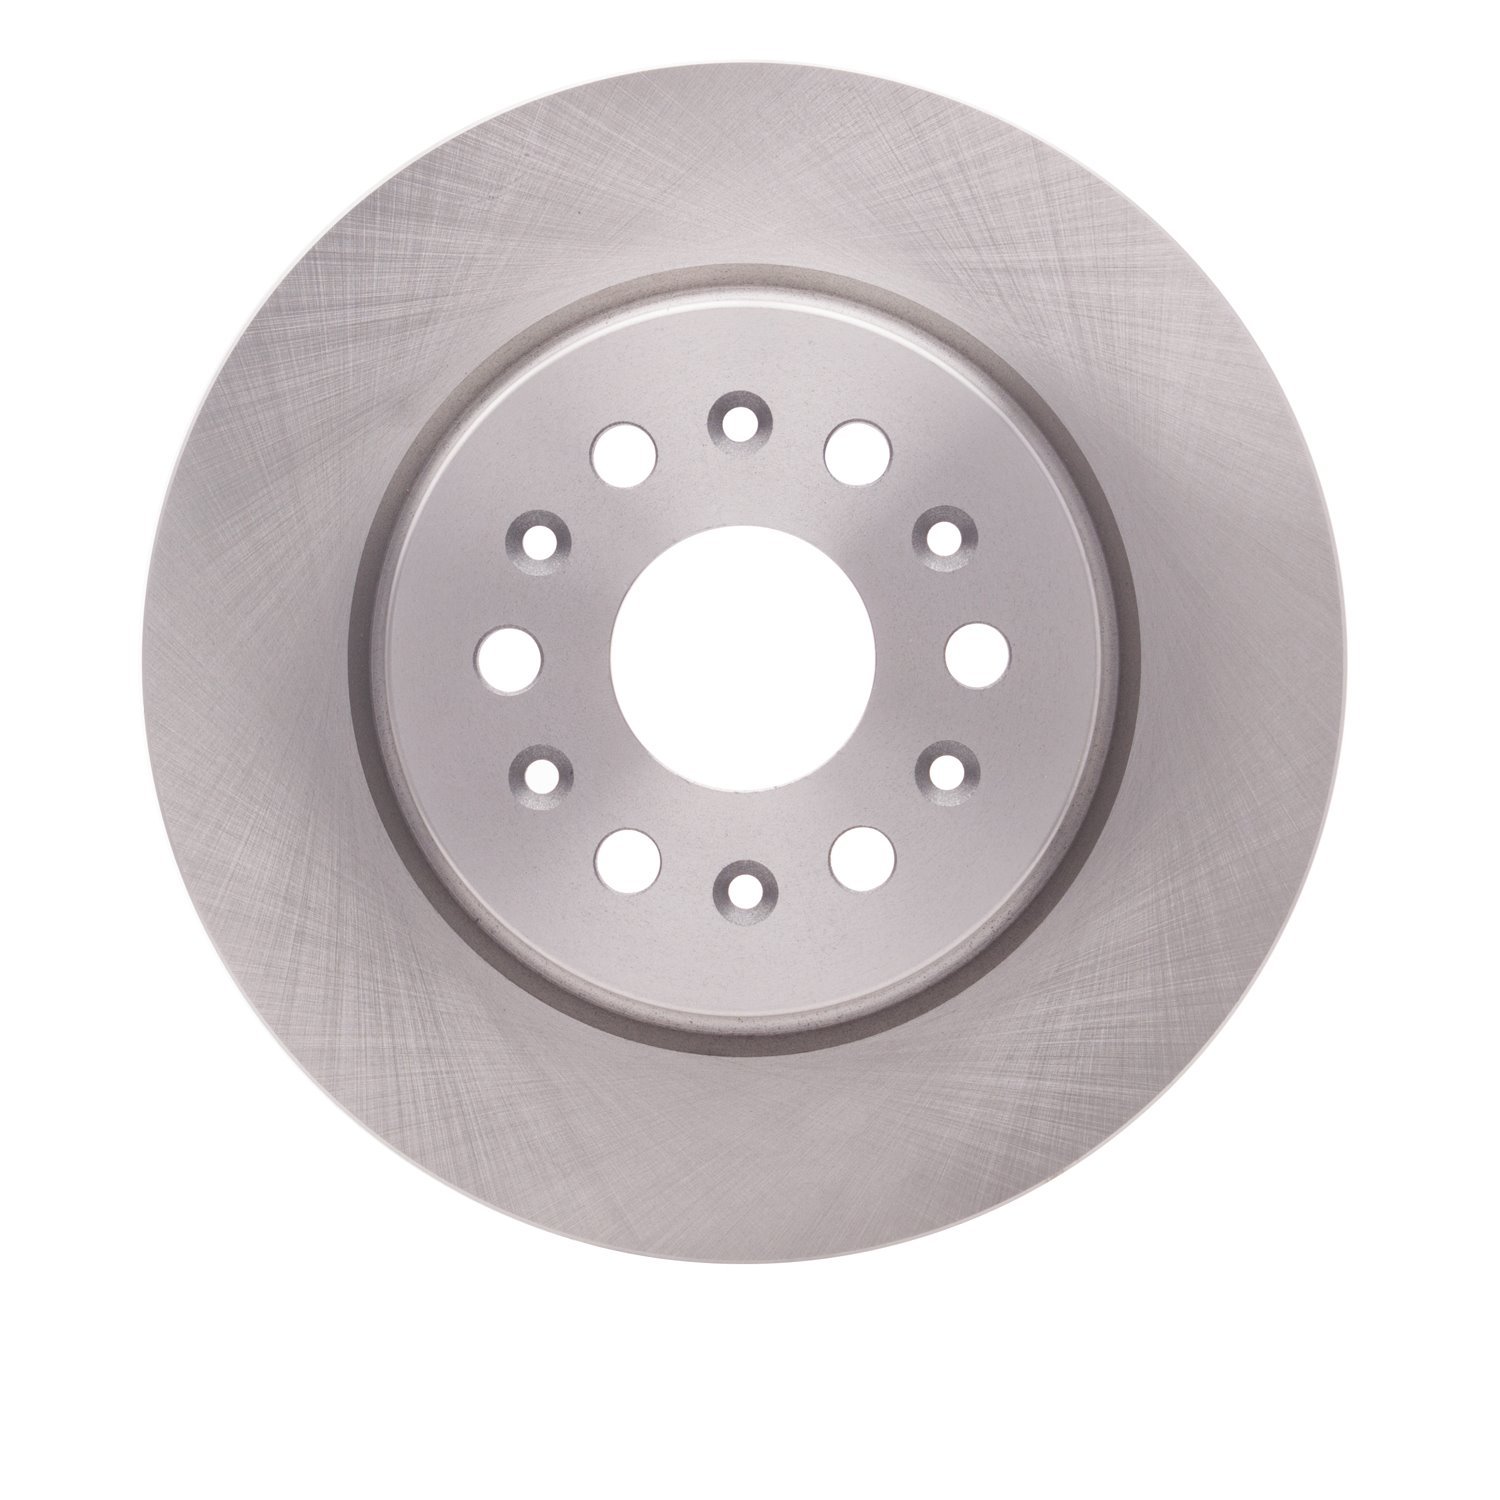 600-48000 Brake Rotor, Fits Select GM, Position: Rear